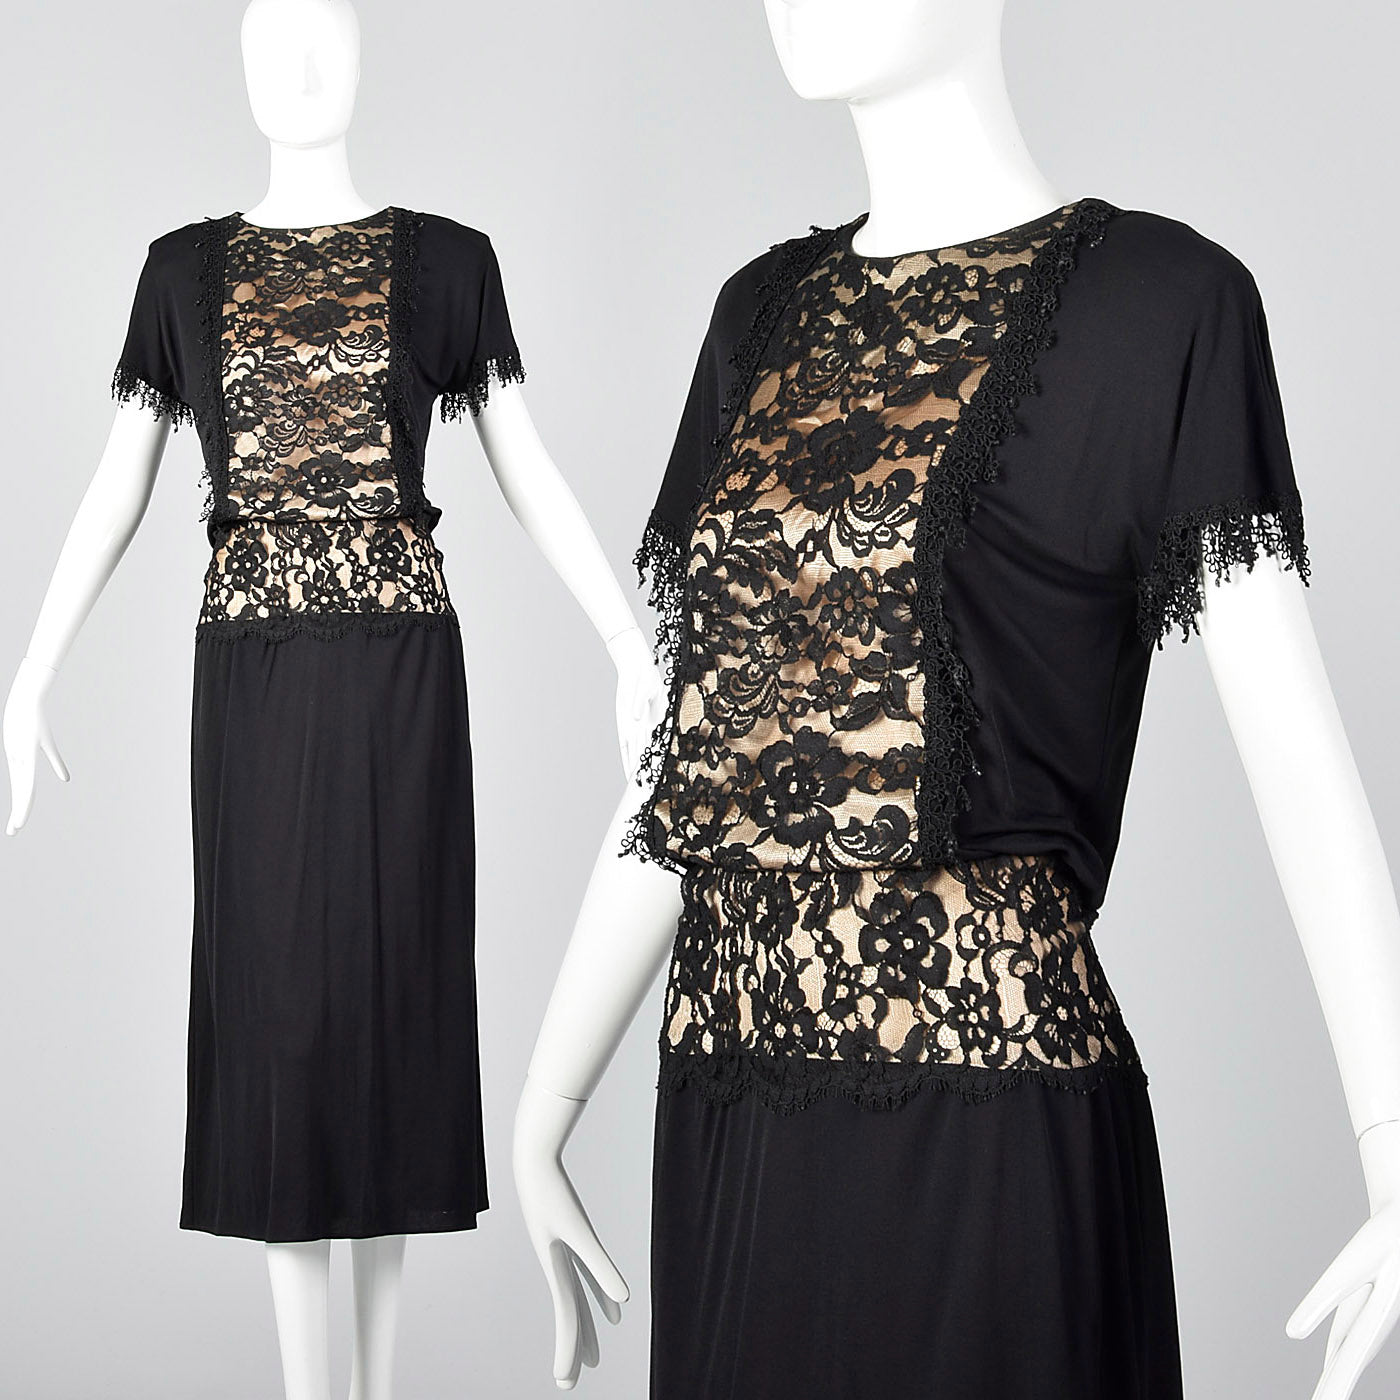 1980s Black Dress with Illusion Lace